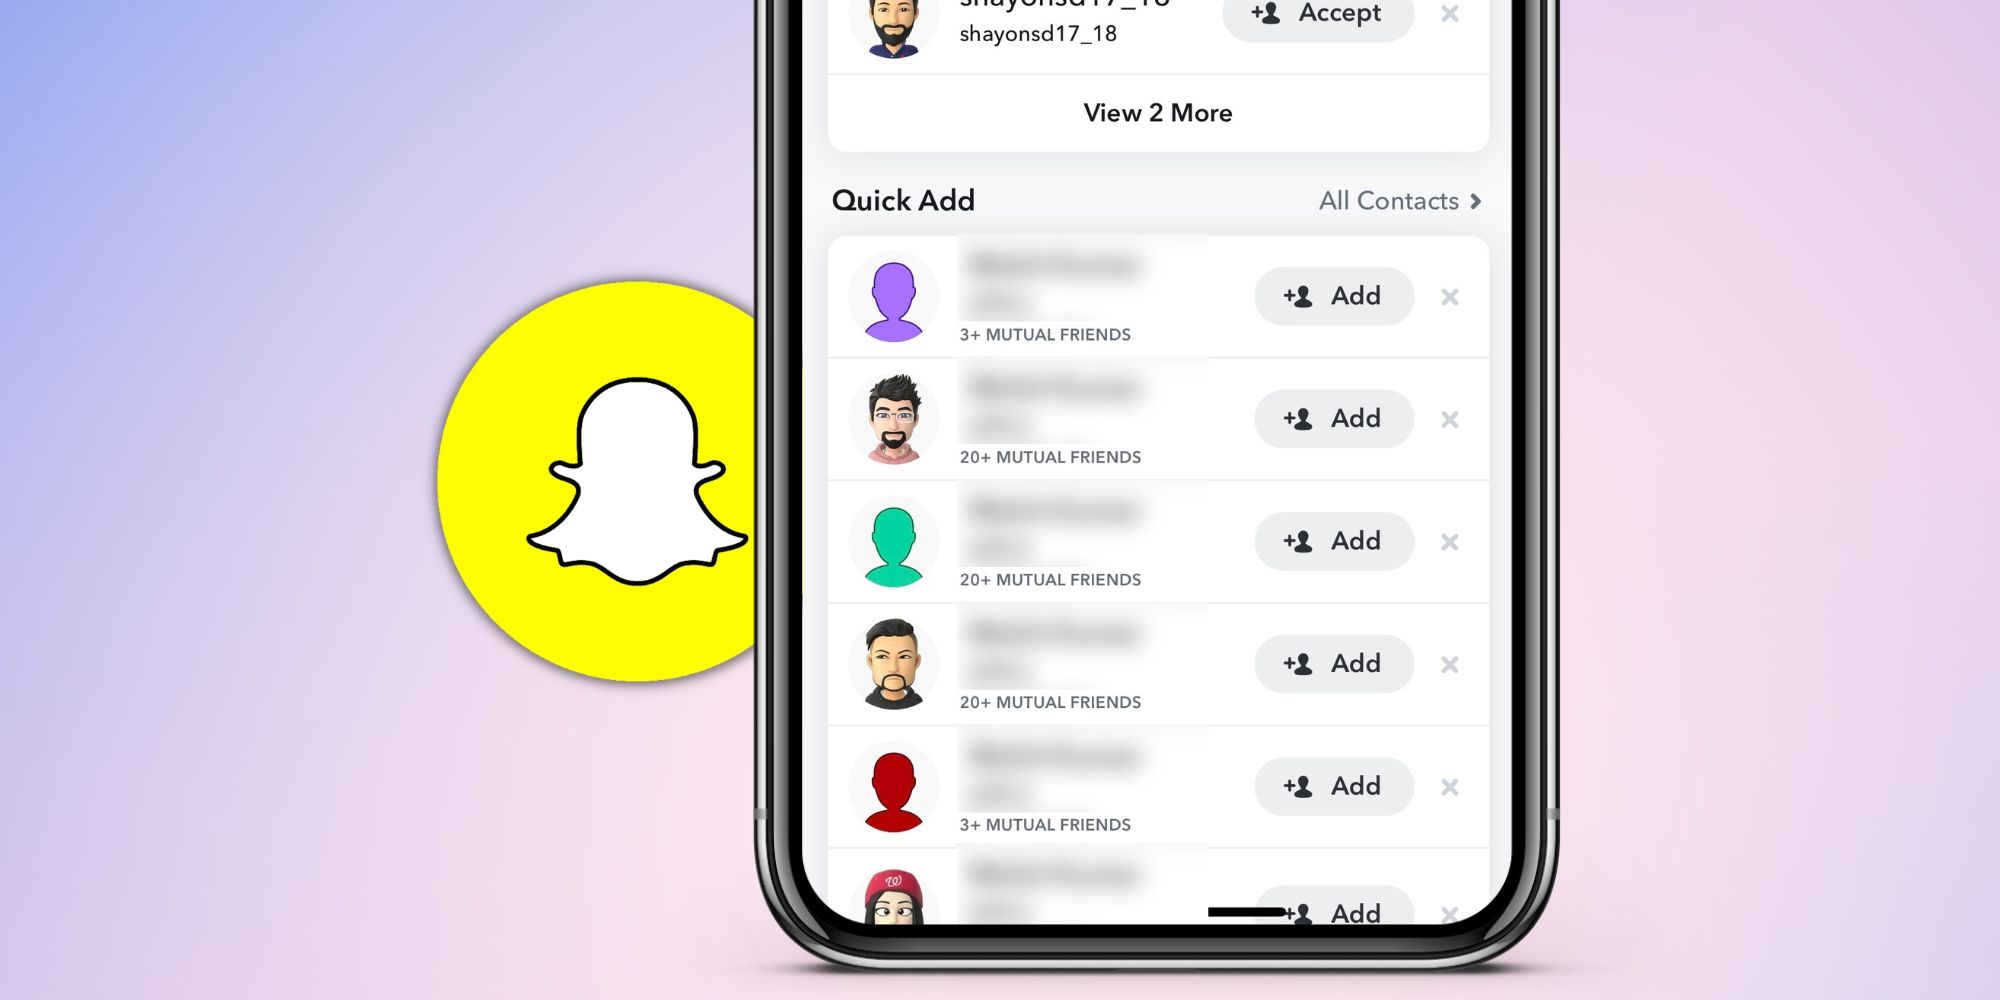 The Snapchat Quick Add screen showing mutual friends